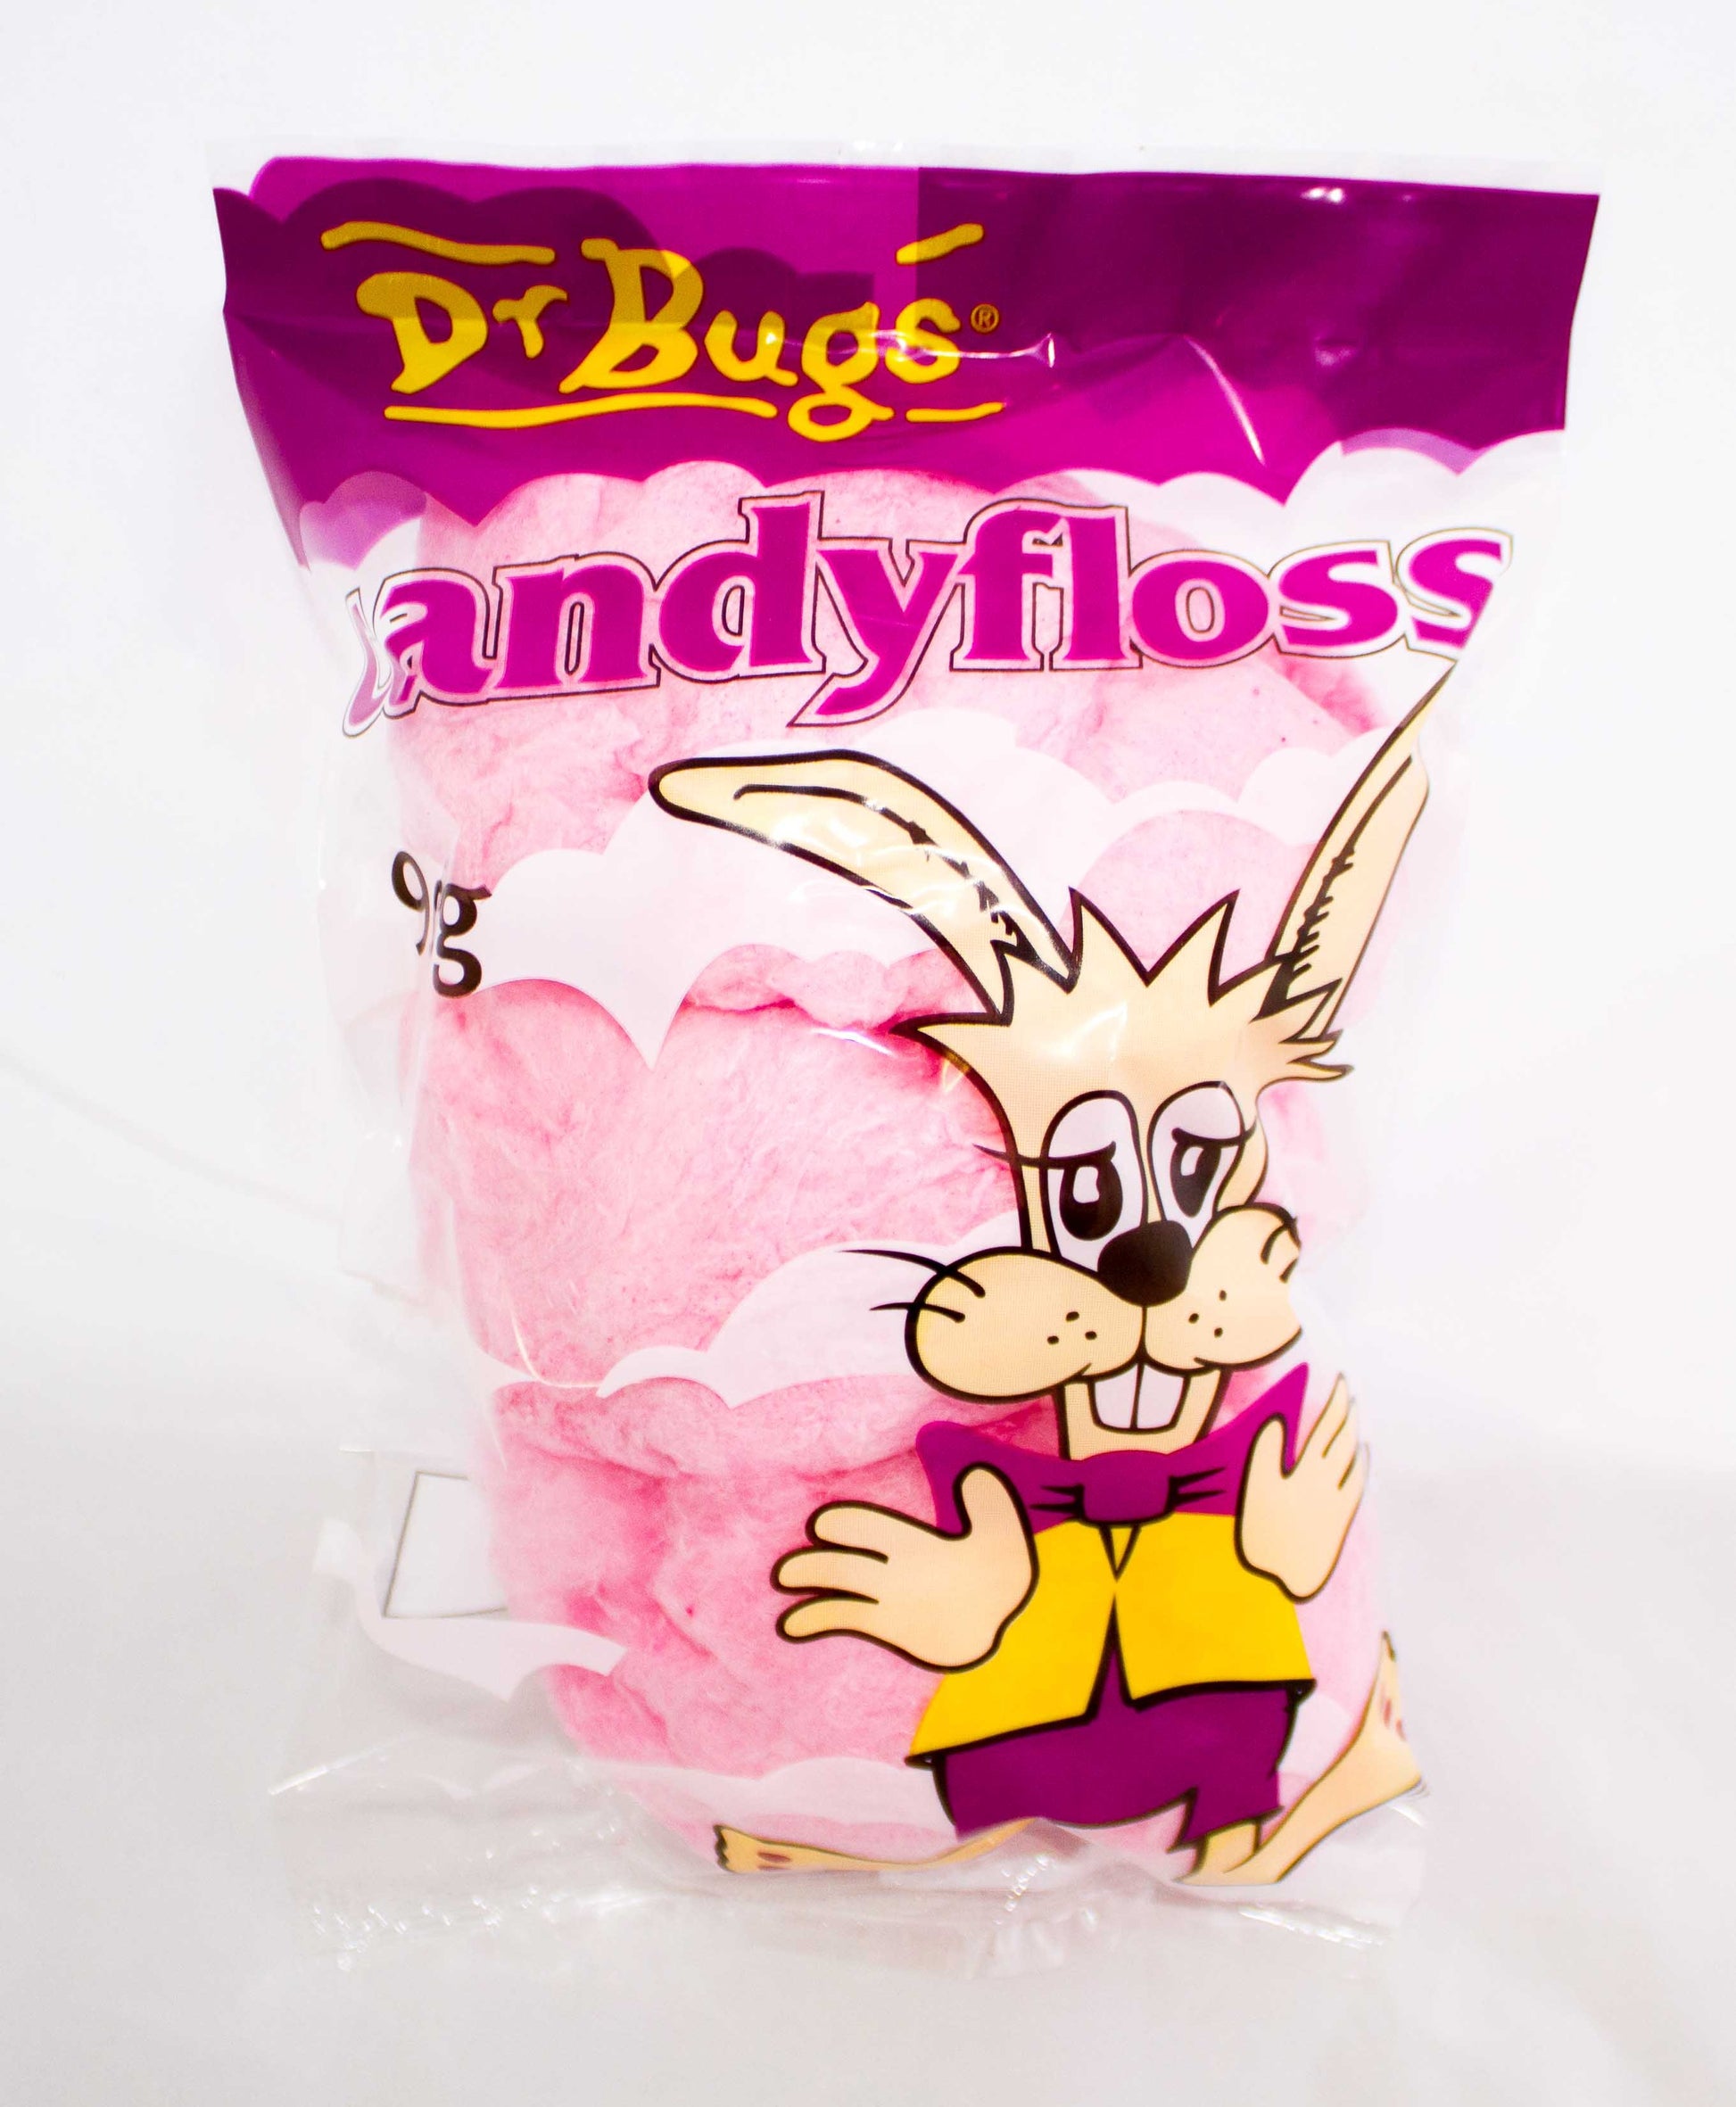 Packet of Dr Bugs Candyfloss 